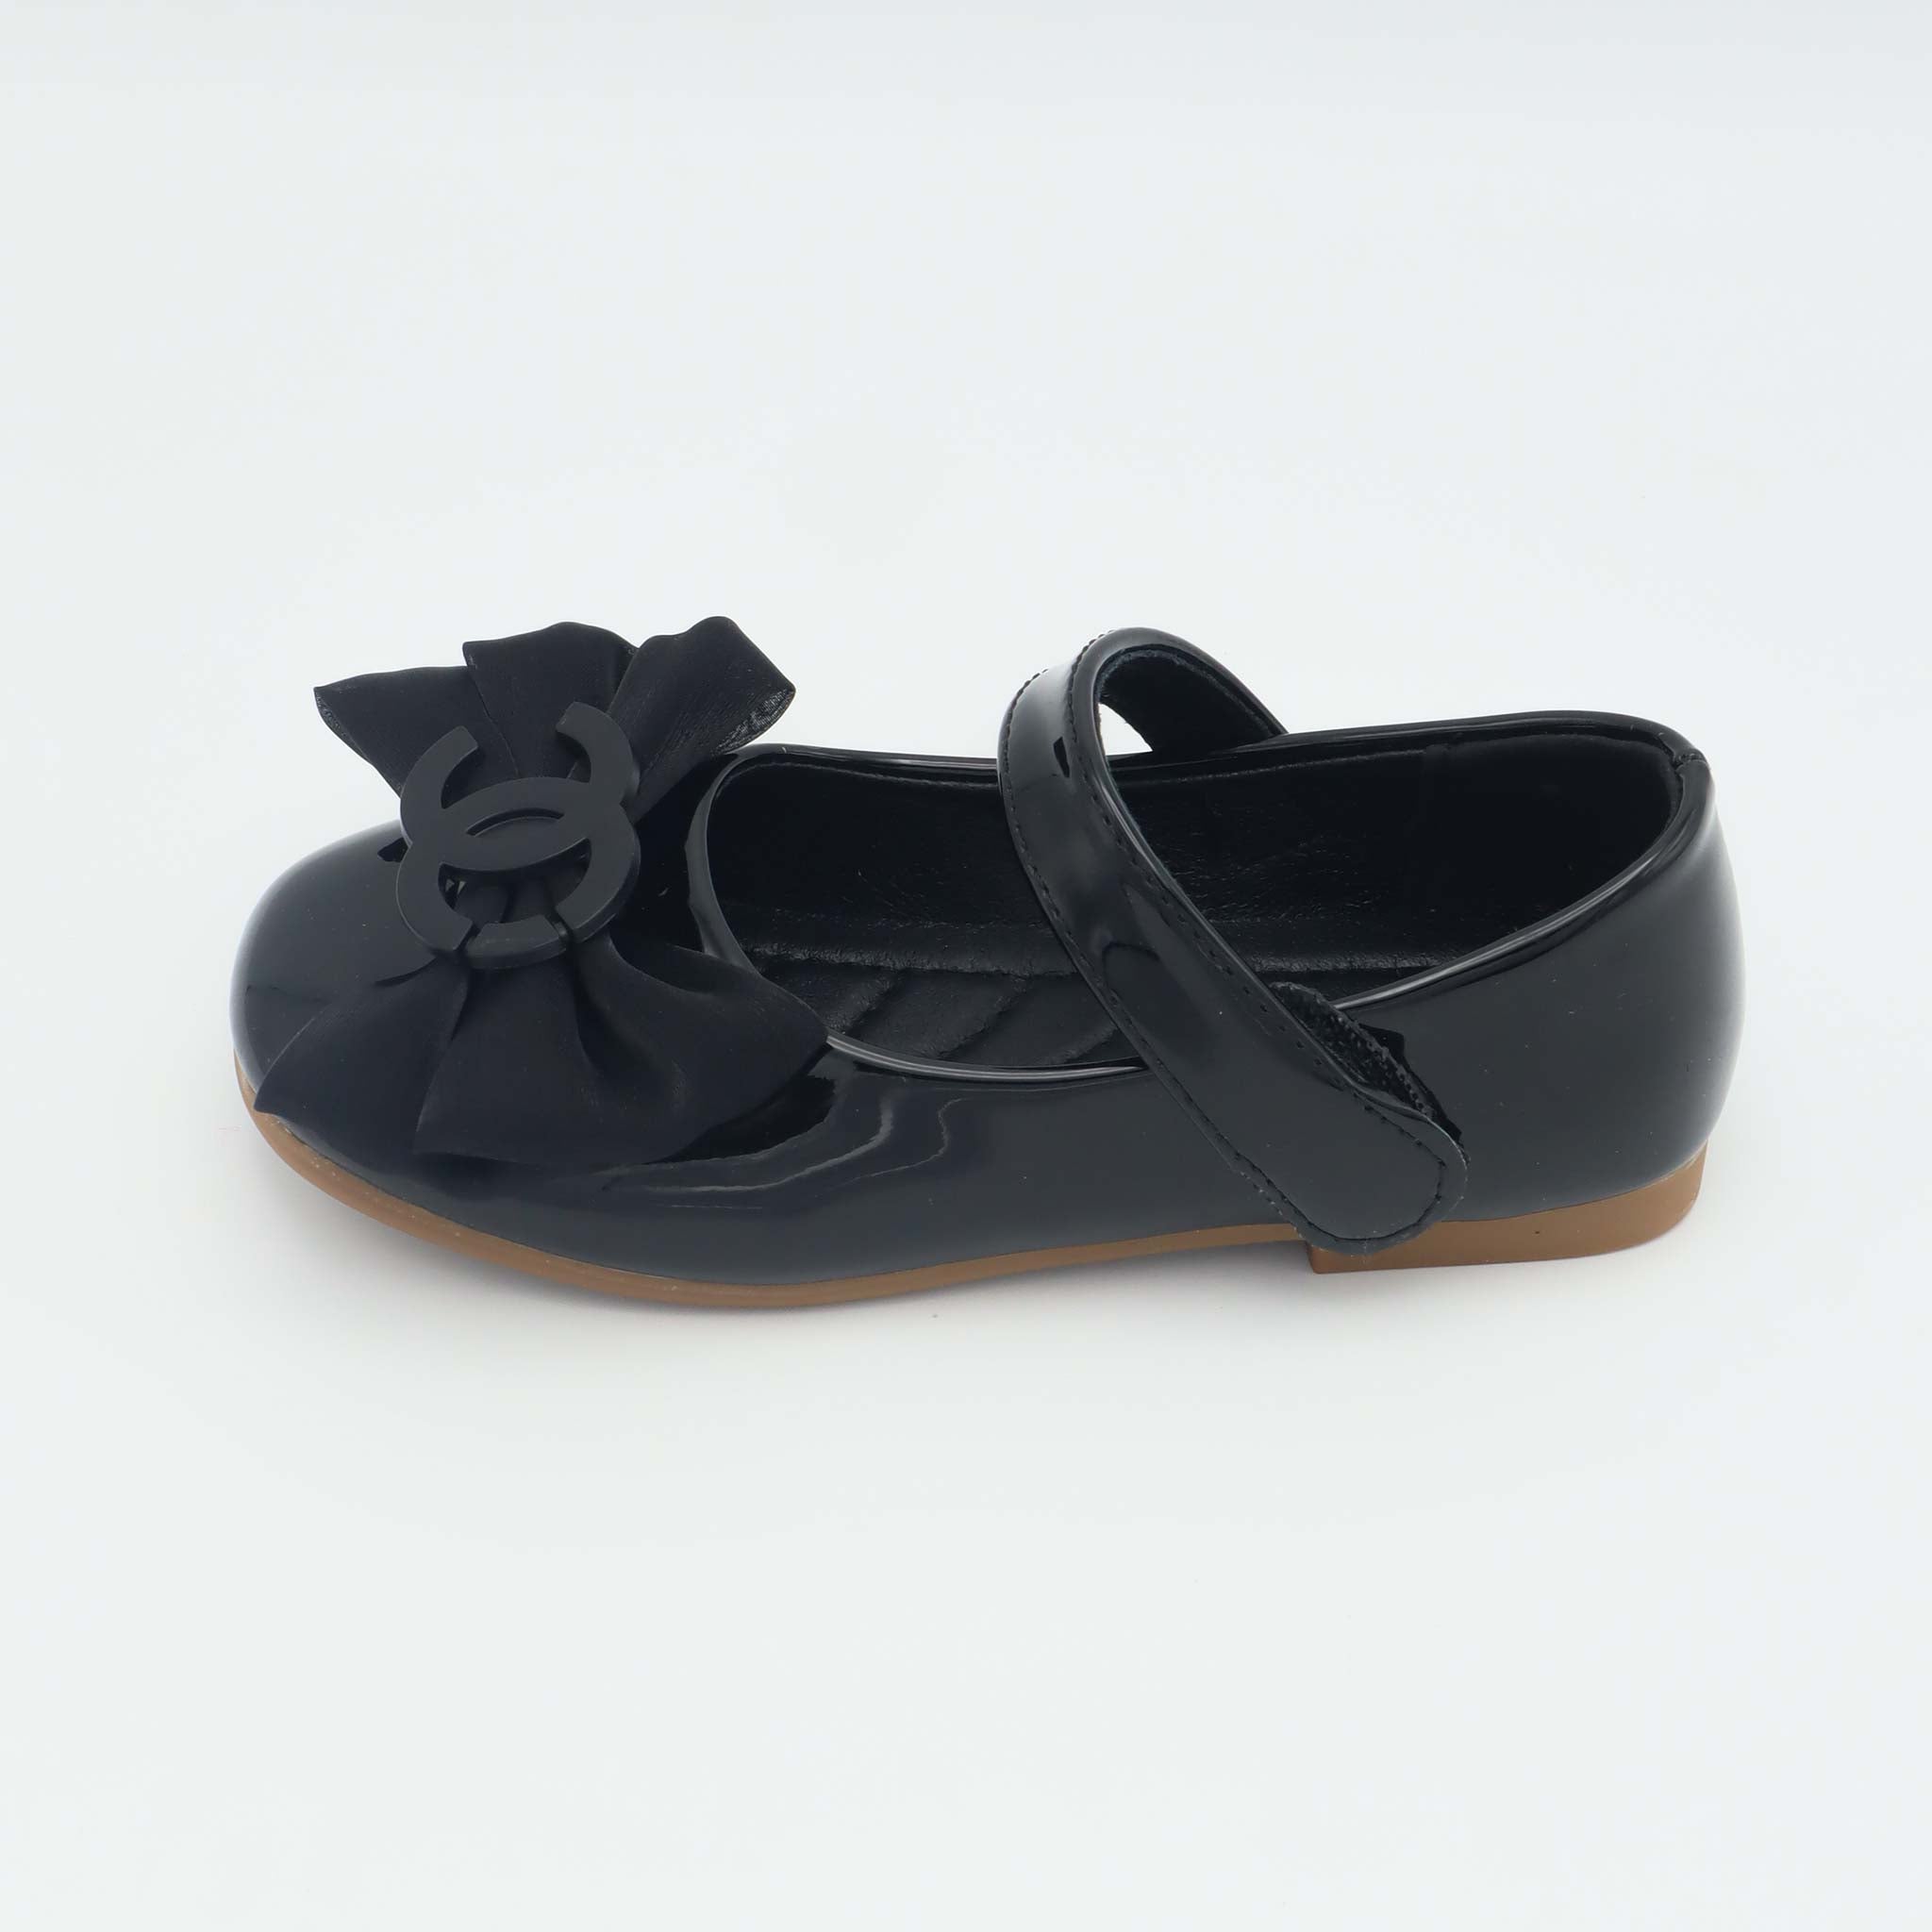 Baby Pumpy Black Color With Bow